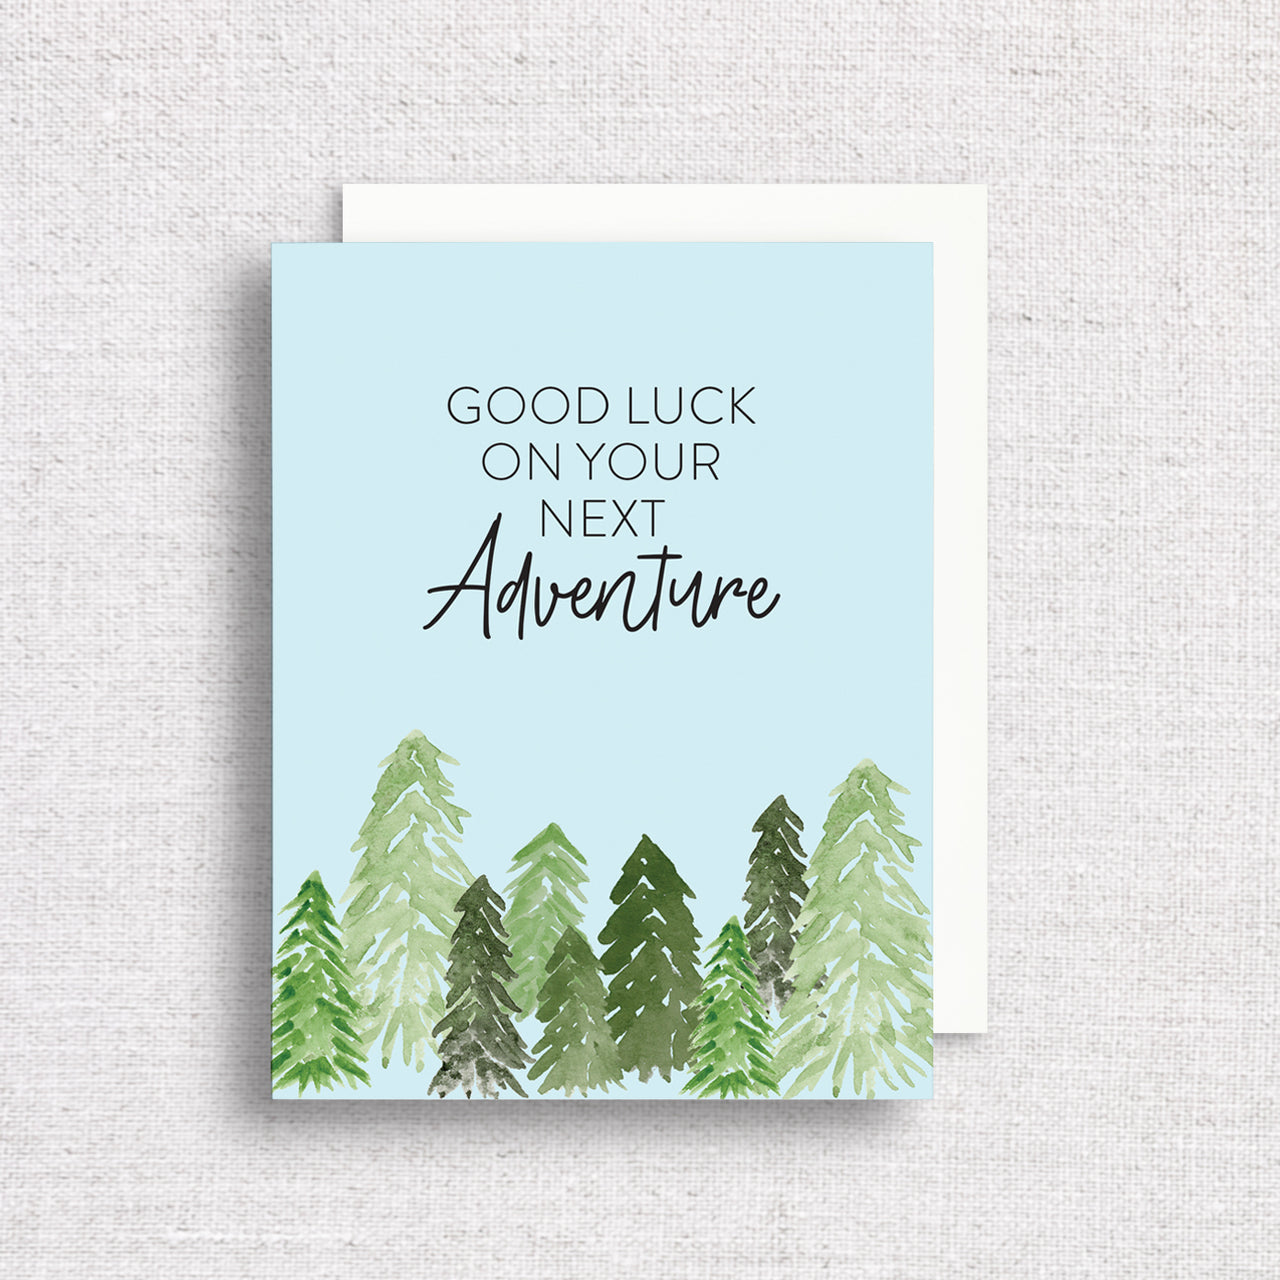 Good Luck on Your Next Adventure Greeting Card